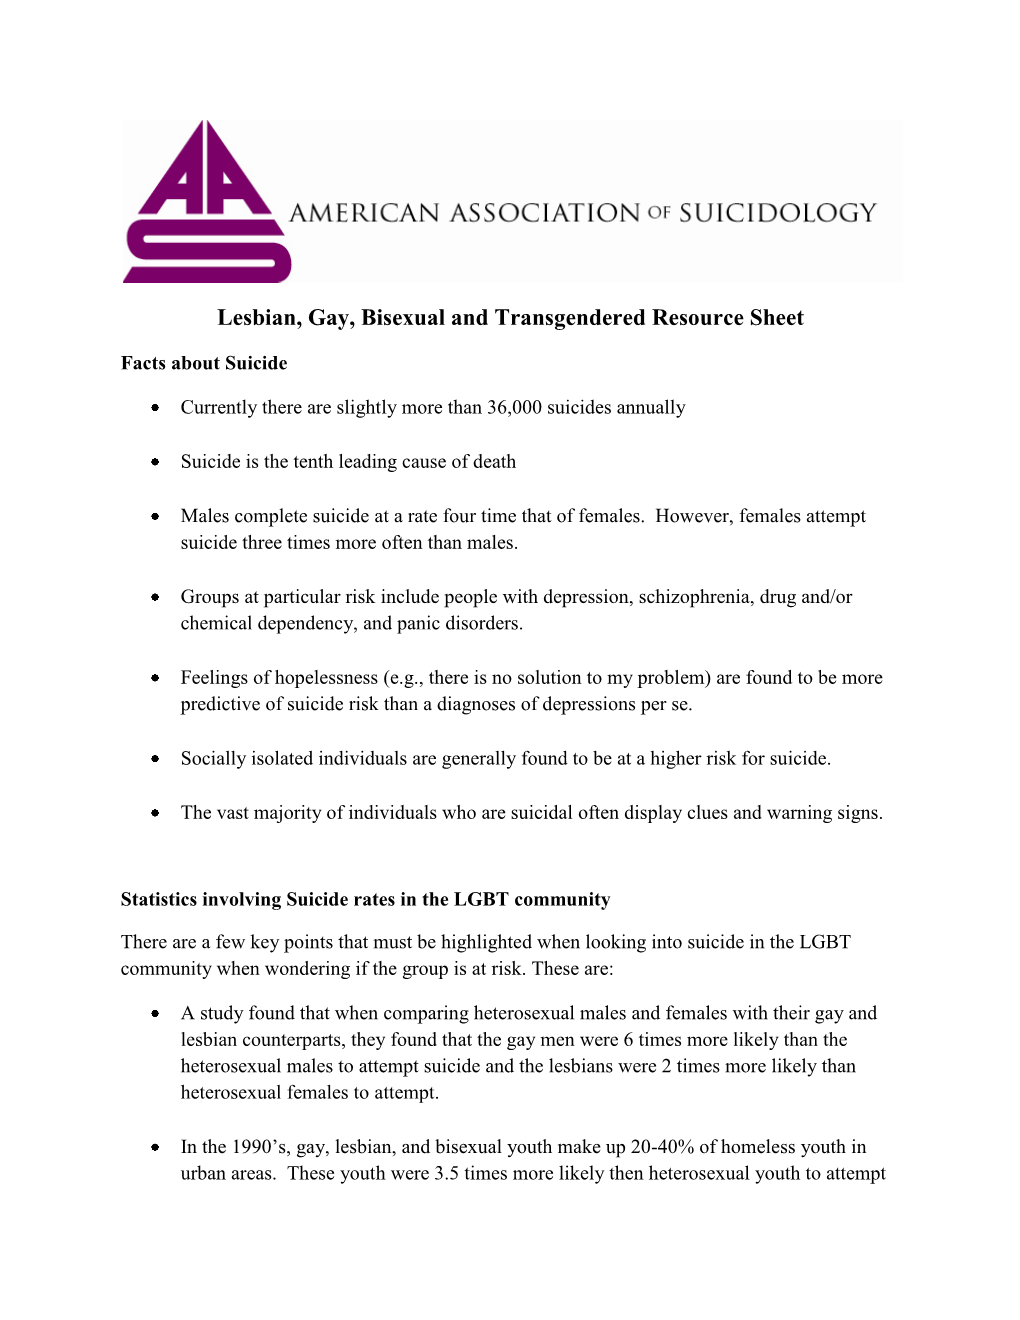 Lesbian, Gay, Bisexual, and Transgendered Resource Sheet